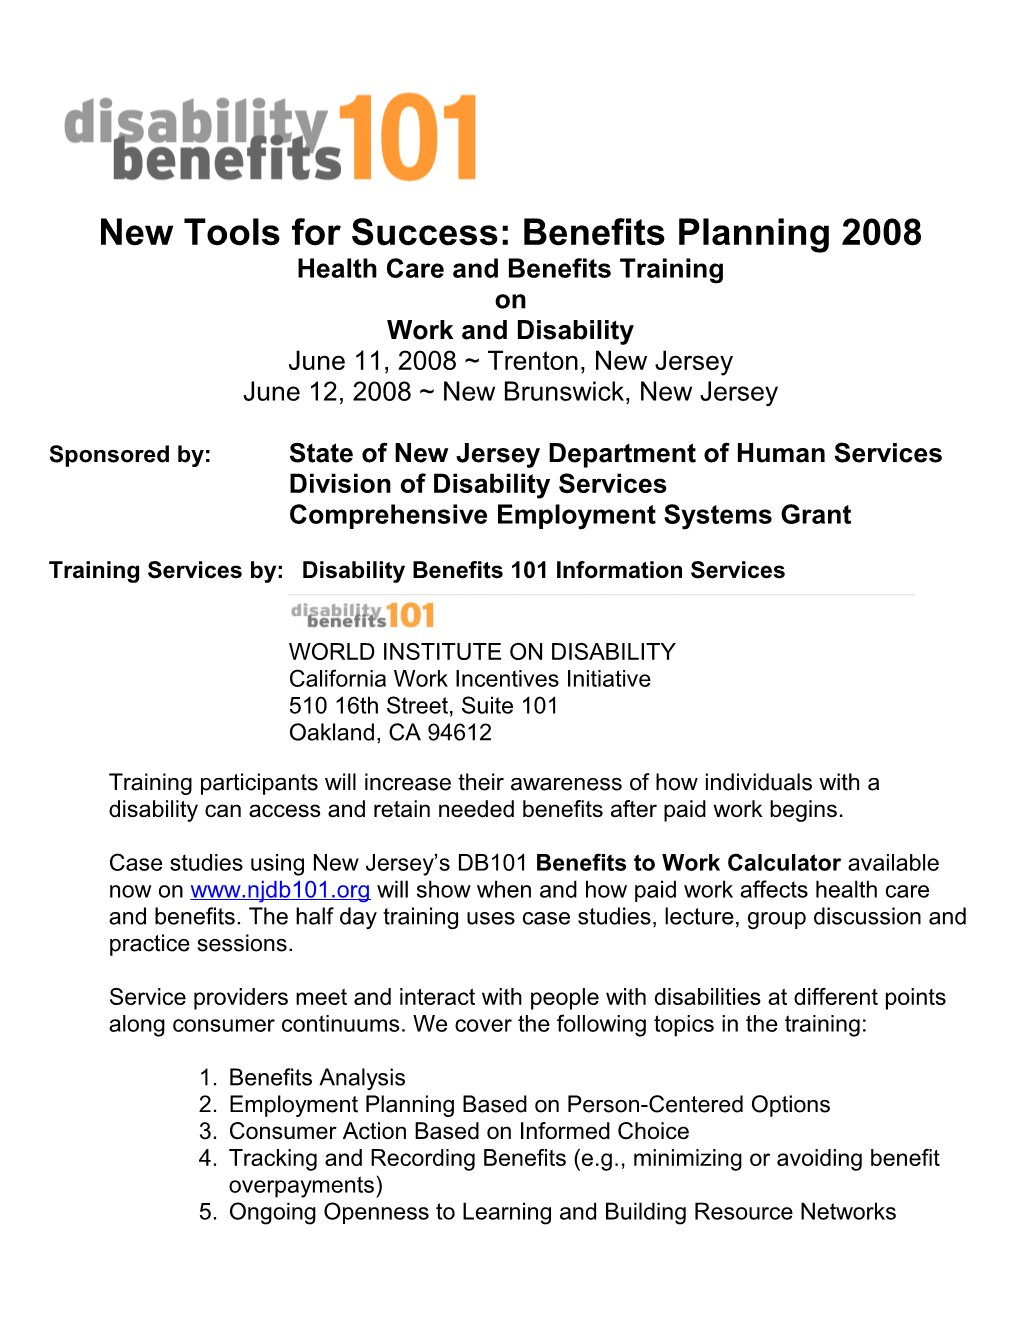 New Tools for Success: Benefits Planning 2008 s1